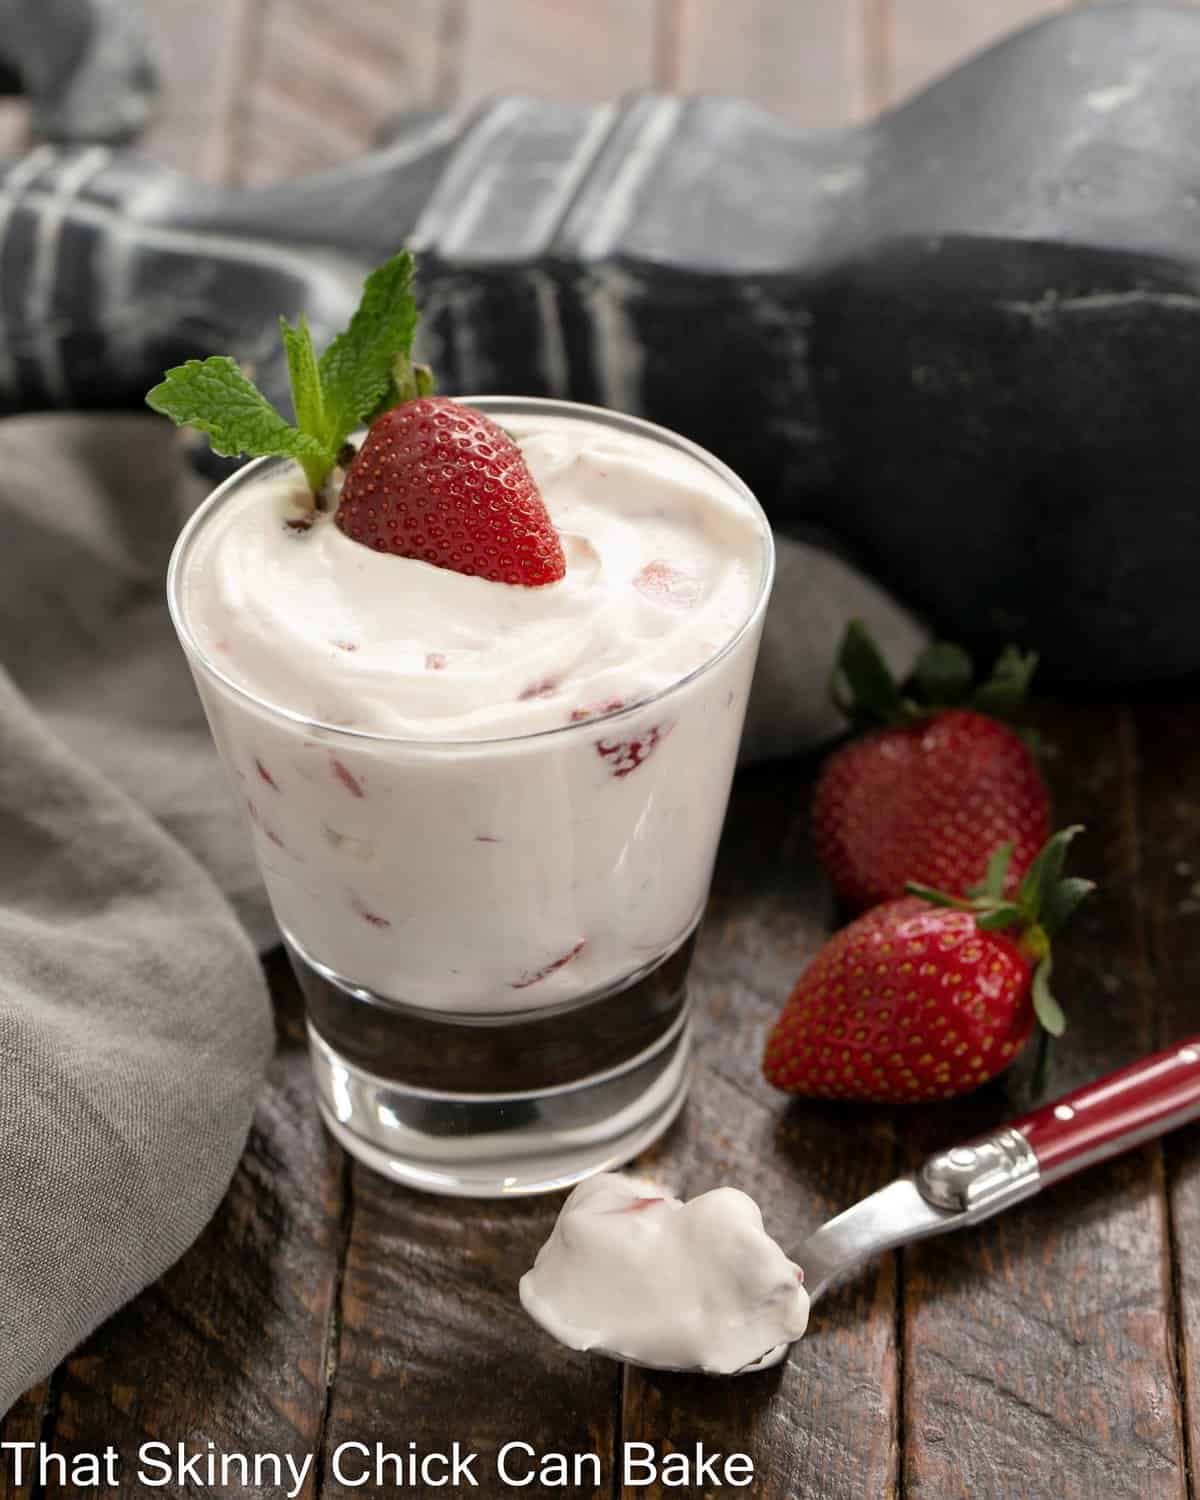 No-Bake Strawberry Fool with a spoon with a bite removed in the foreground.